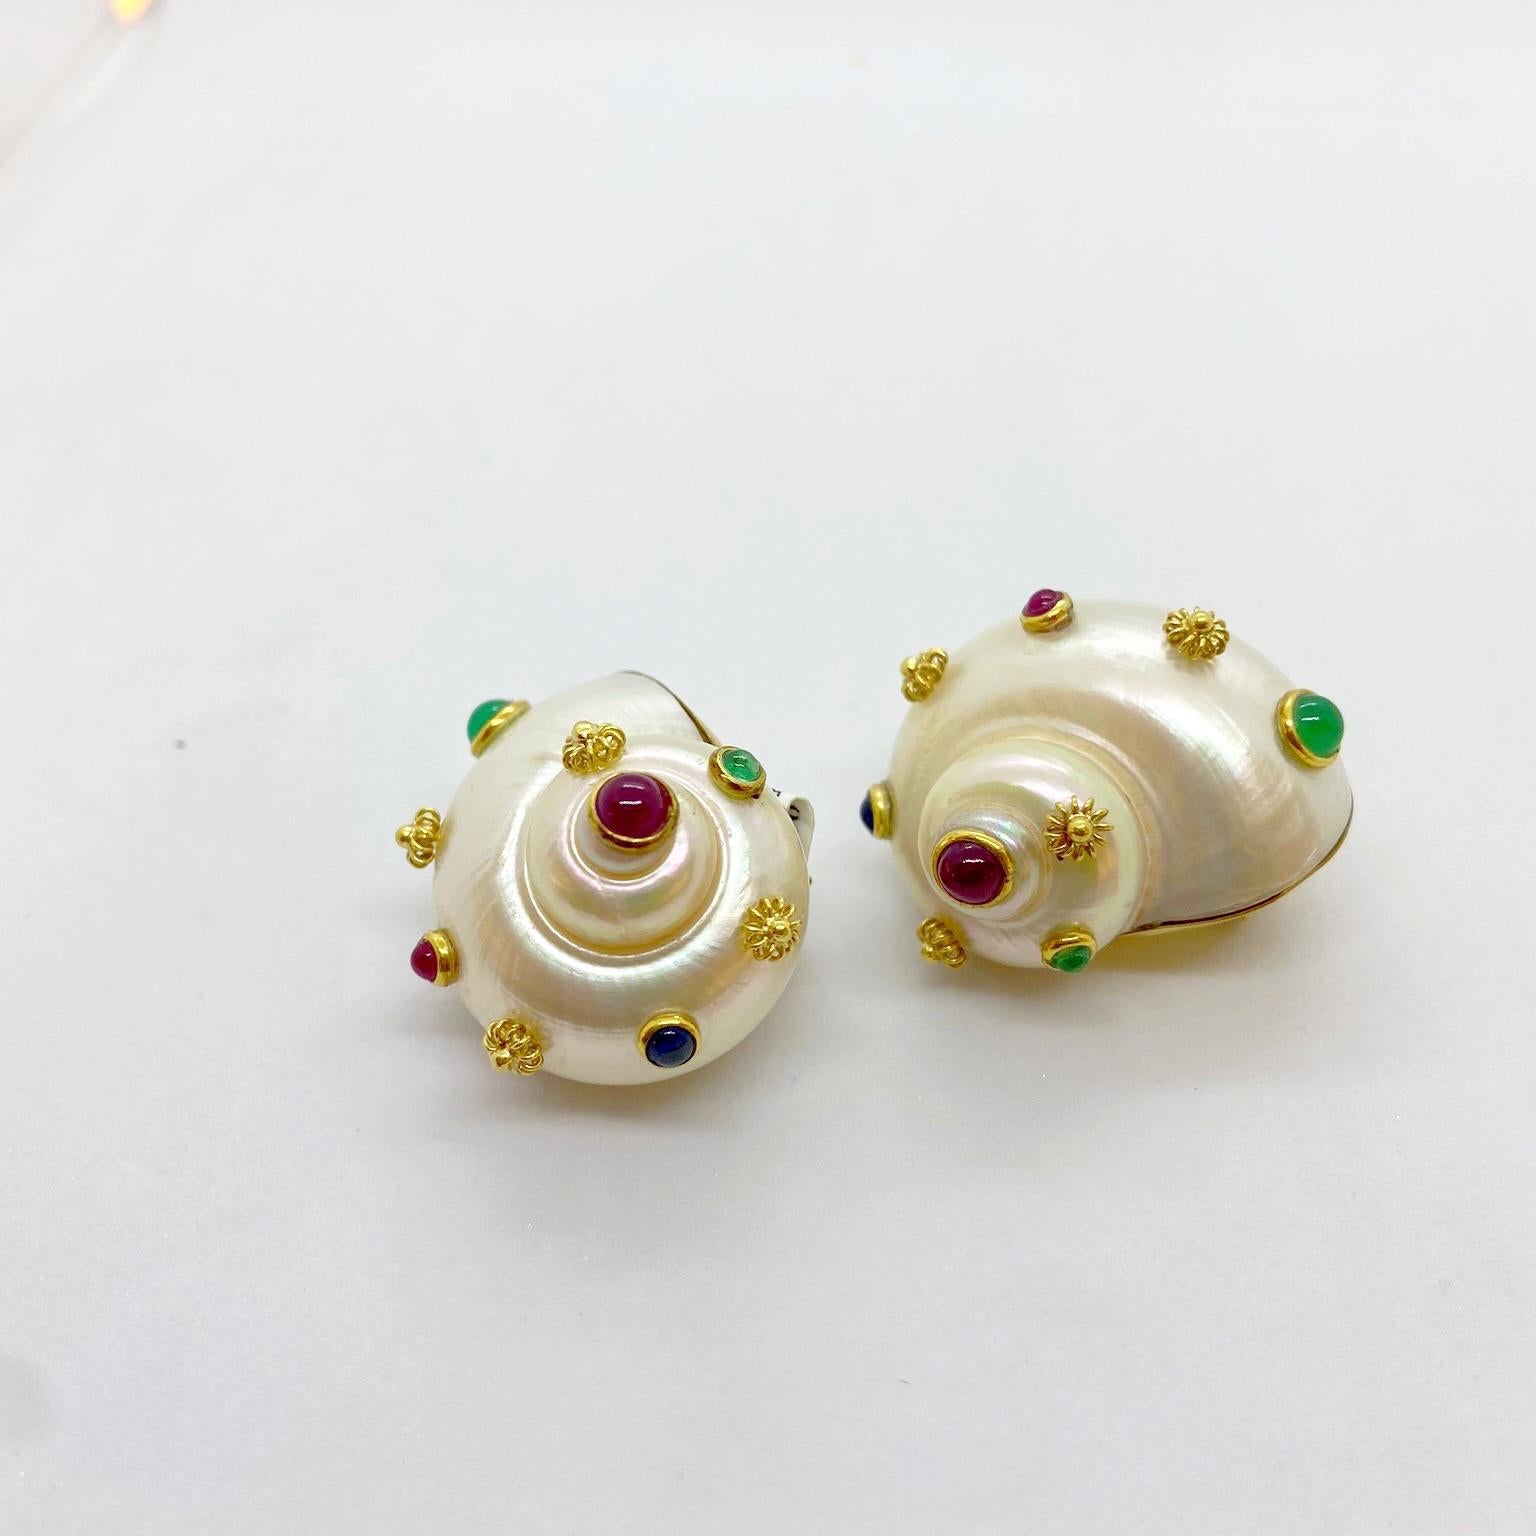 Retro Shell Ear Clips with 18 Karat Yellow Gold, Ruby, Emerald and Sapphire